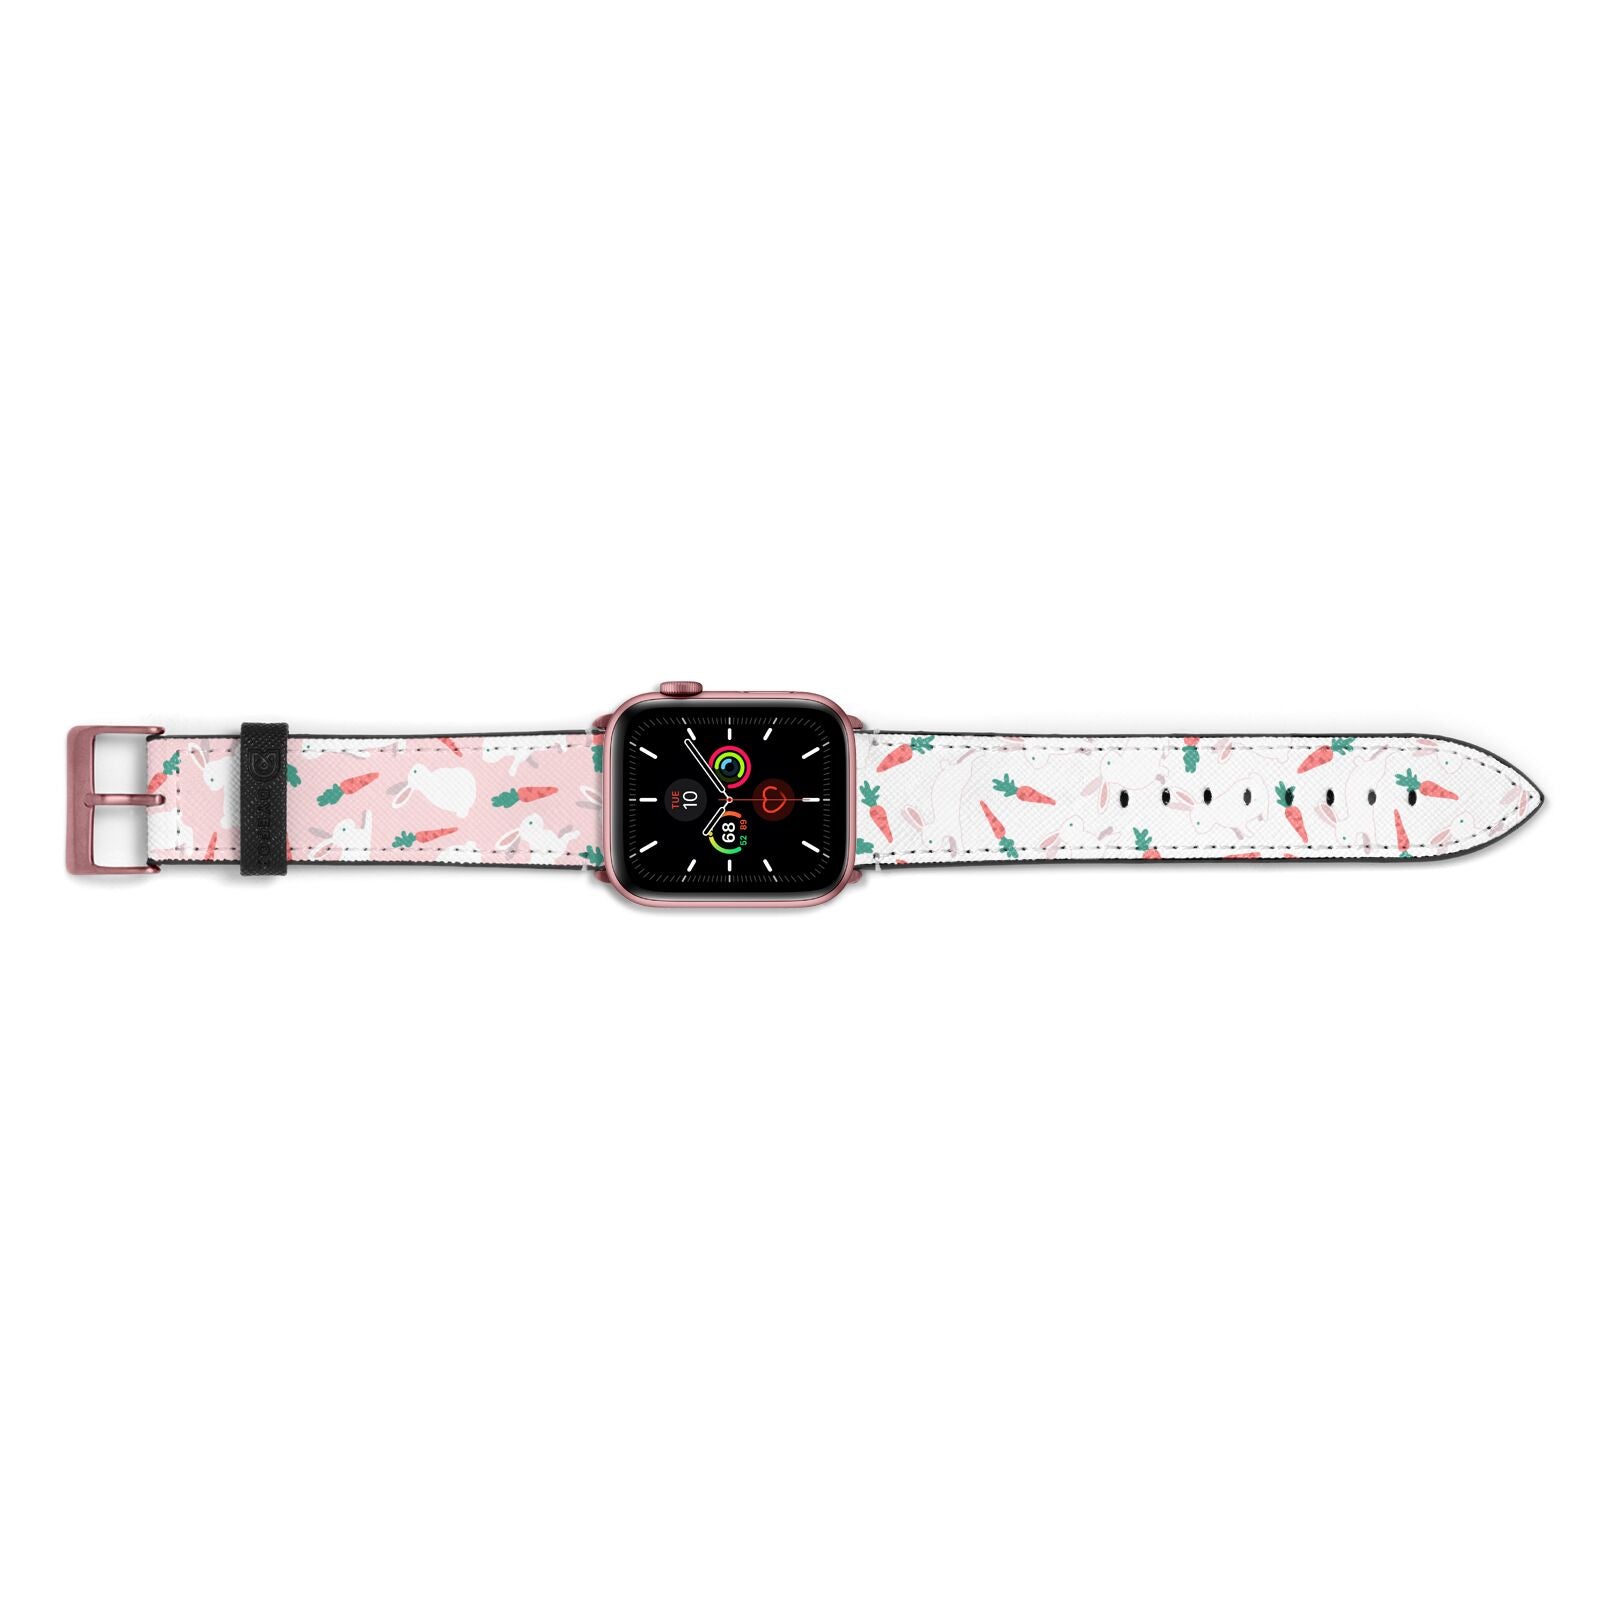 Easter Bunny And Carrot Apple Watch Strap Landscape Image Rose Gold Hardware